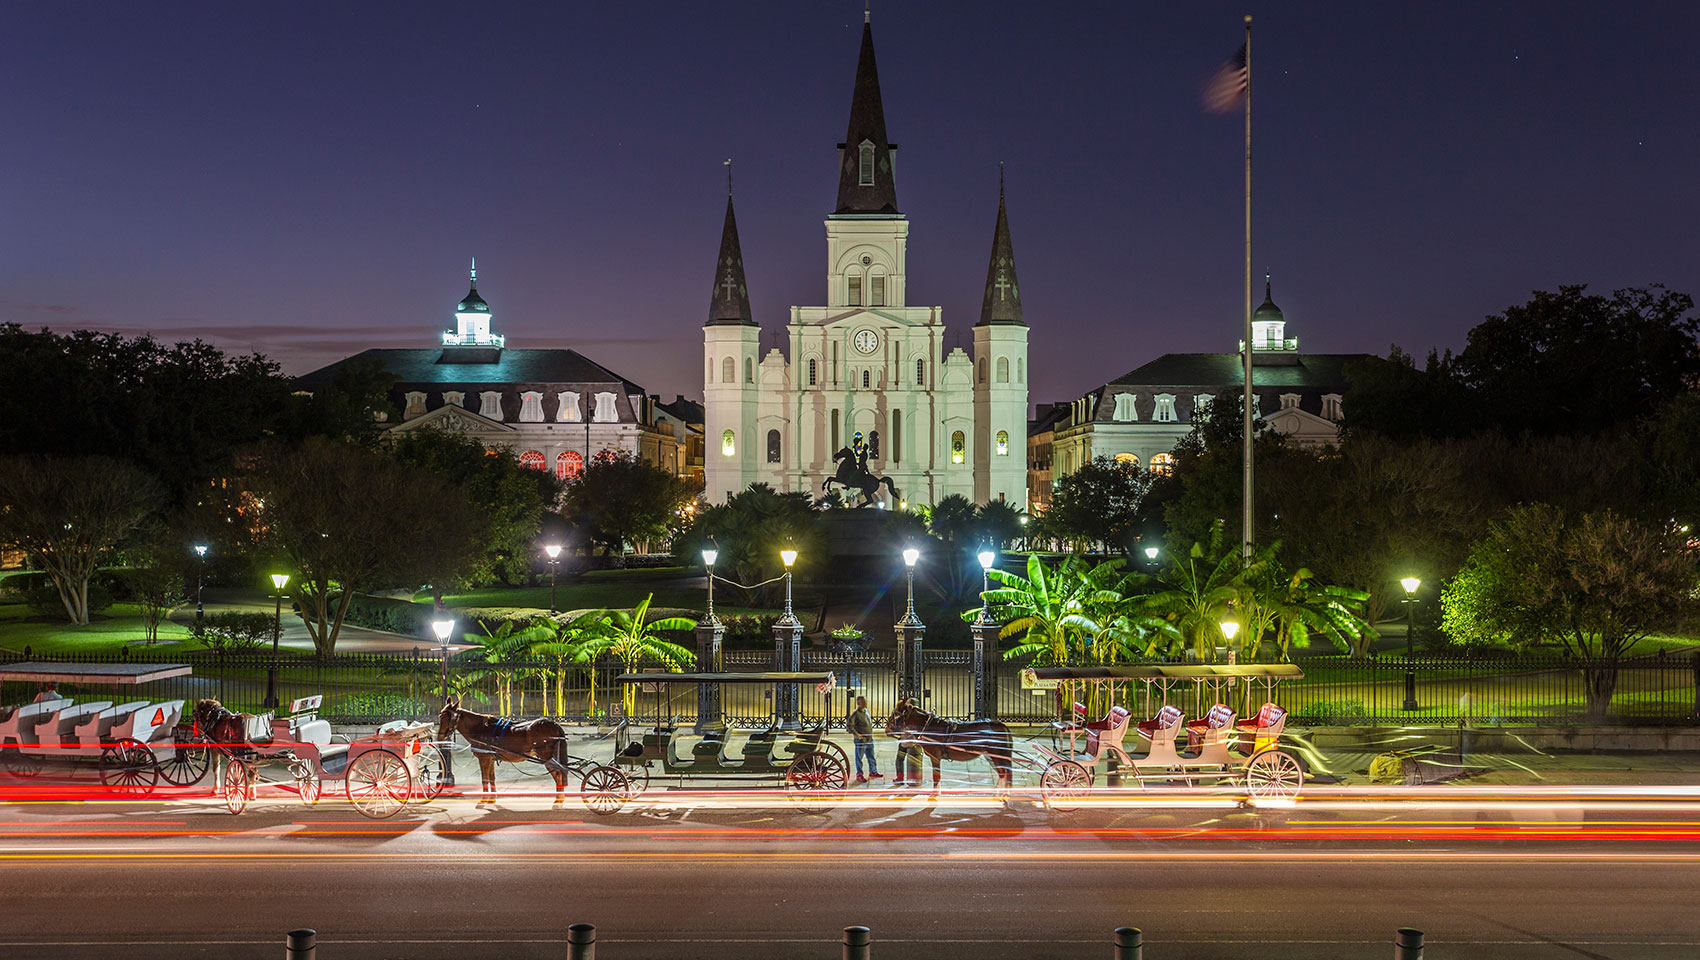 Jackson Square New Orleans nighttime view